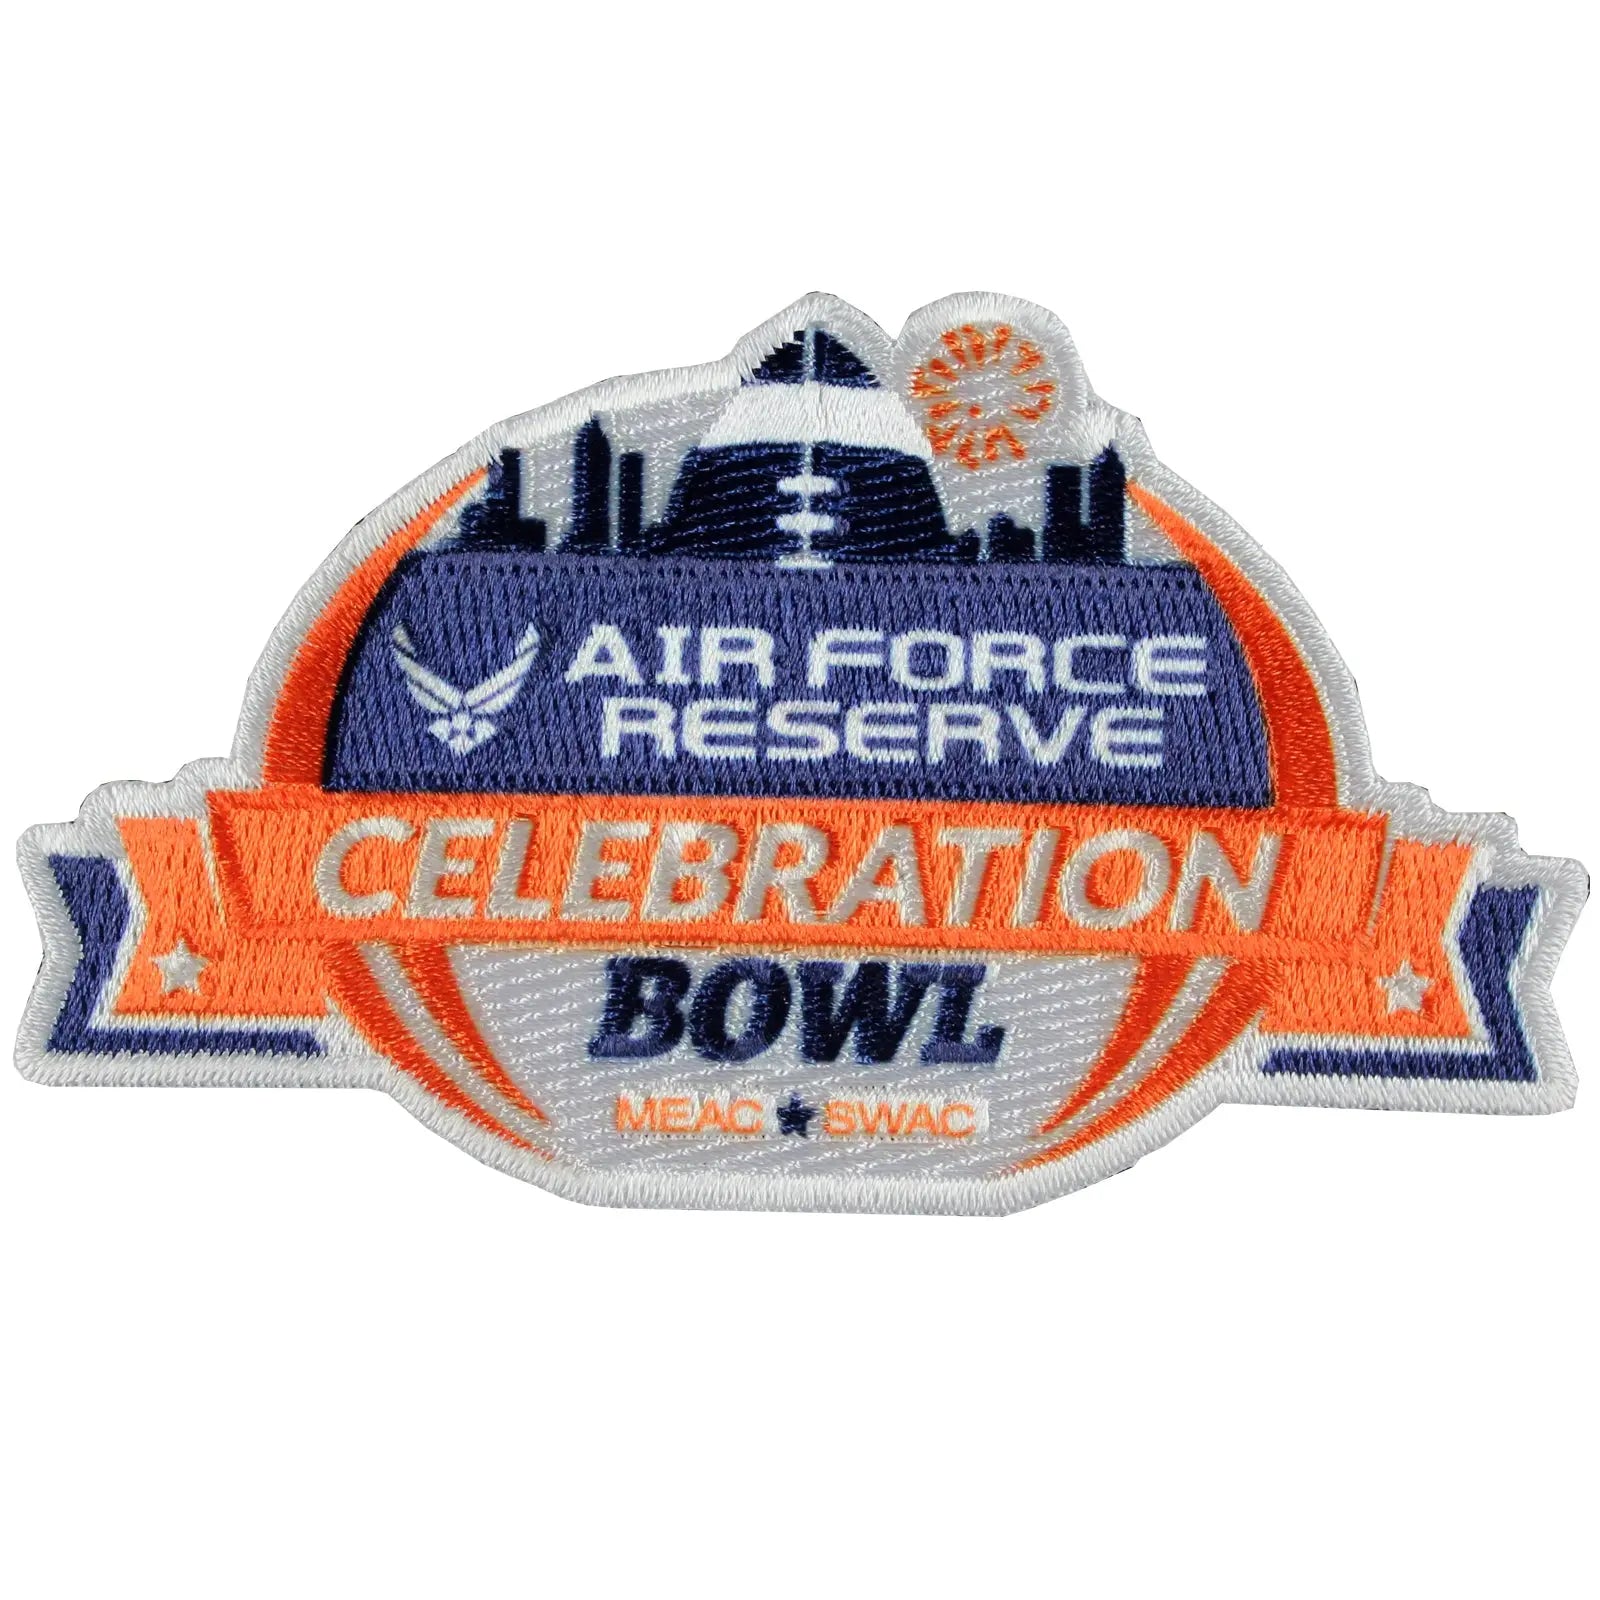 Air Force Reserve Celebration Bowl Jersey Patch Grambling Tigers Vs. NC Central Eagles 